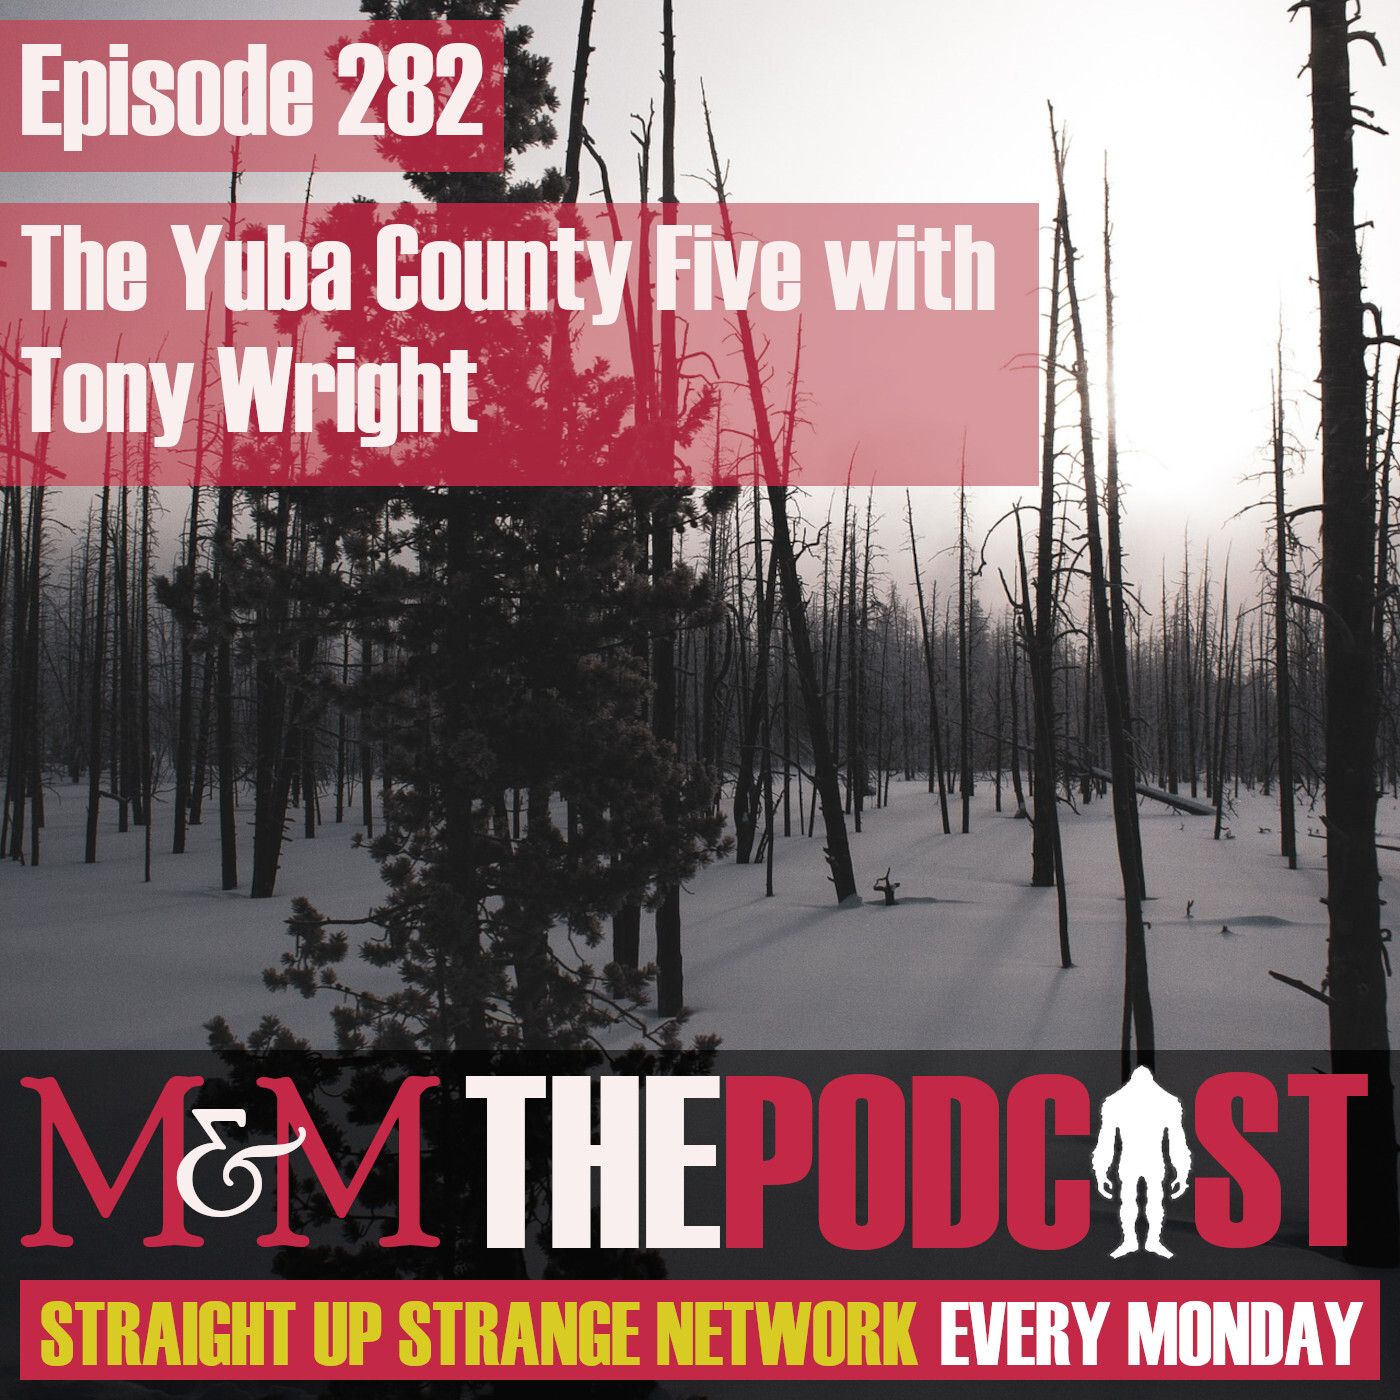 Mysteries and Monsters: Episode 282 The Yuba County Five with Tony Wright